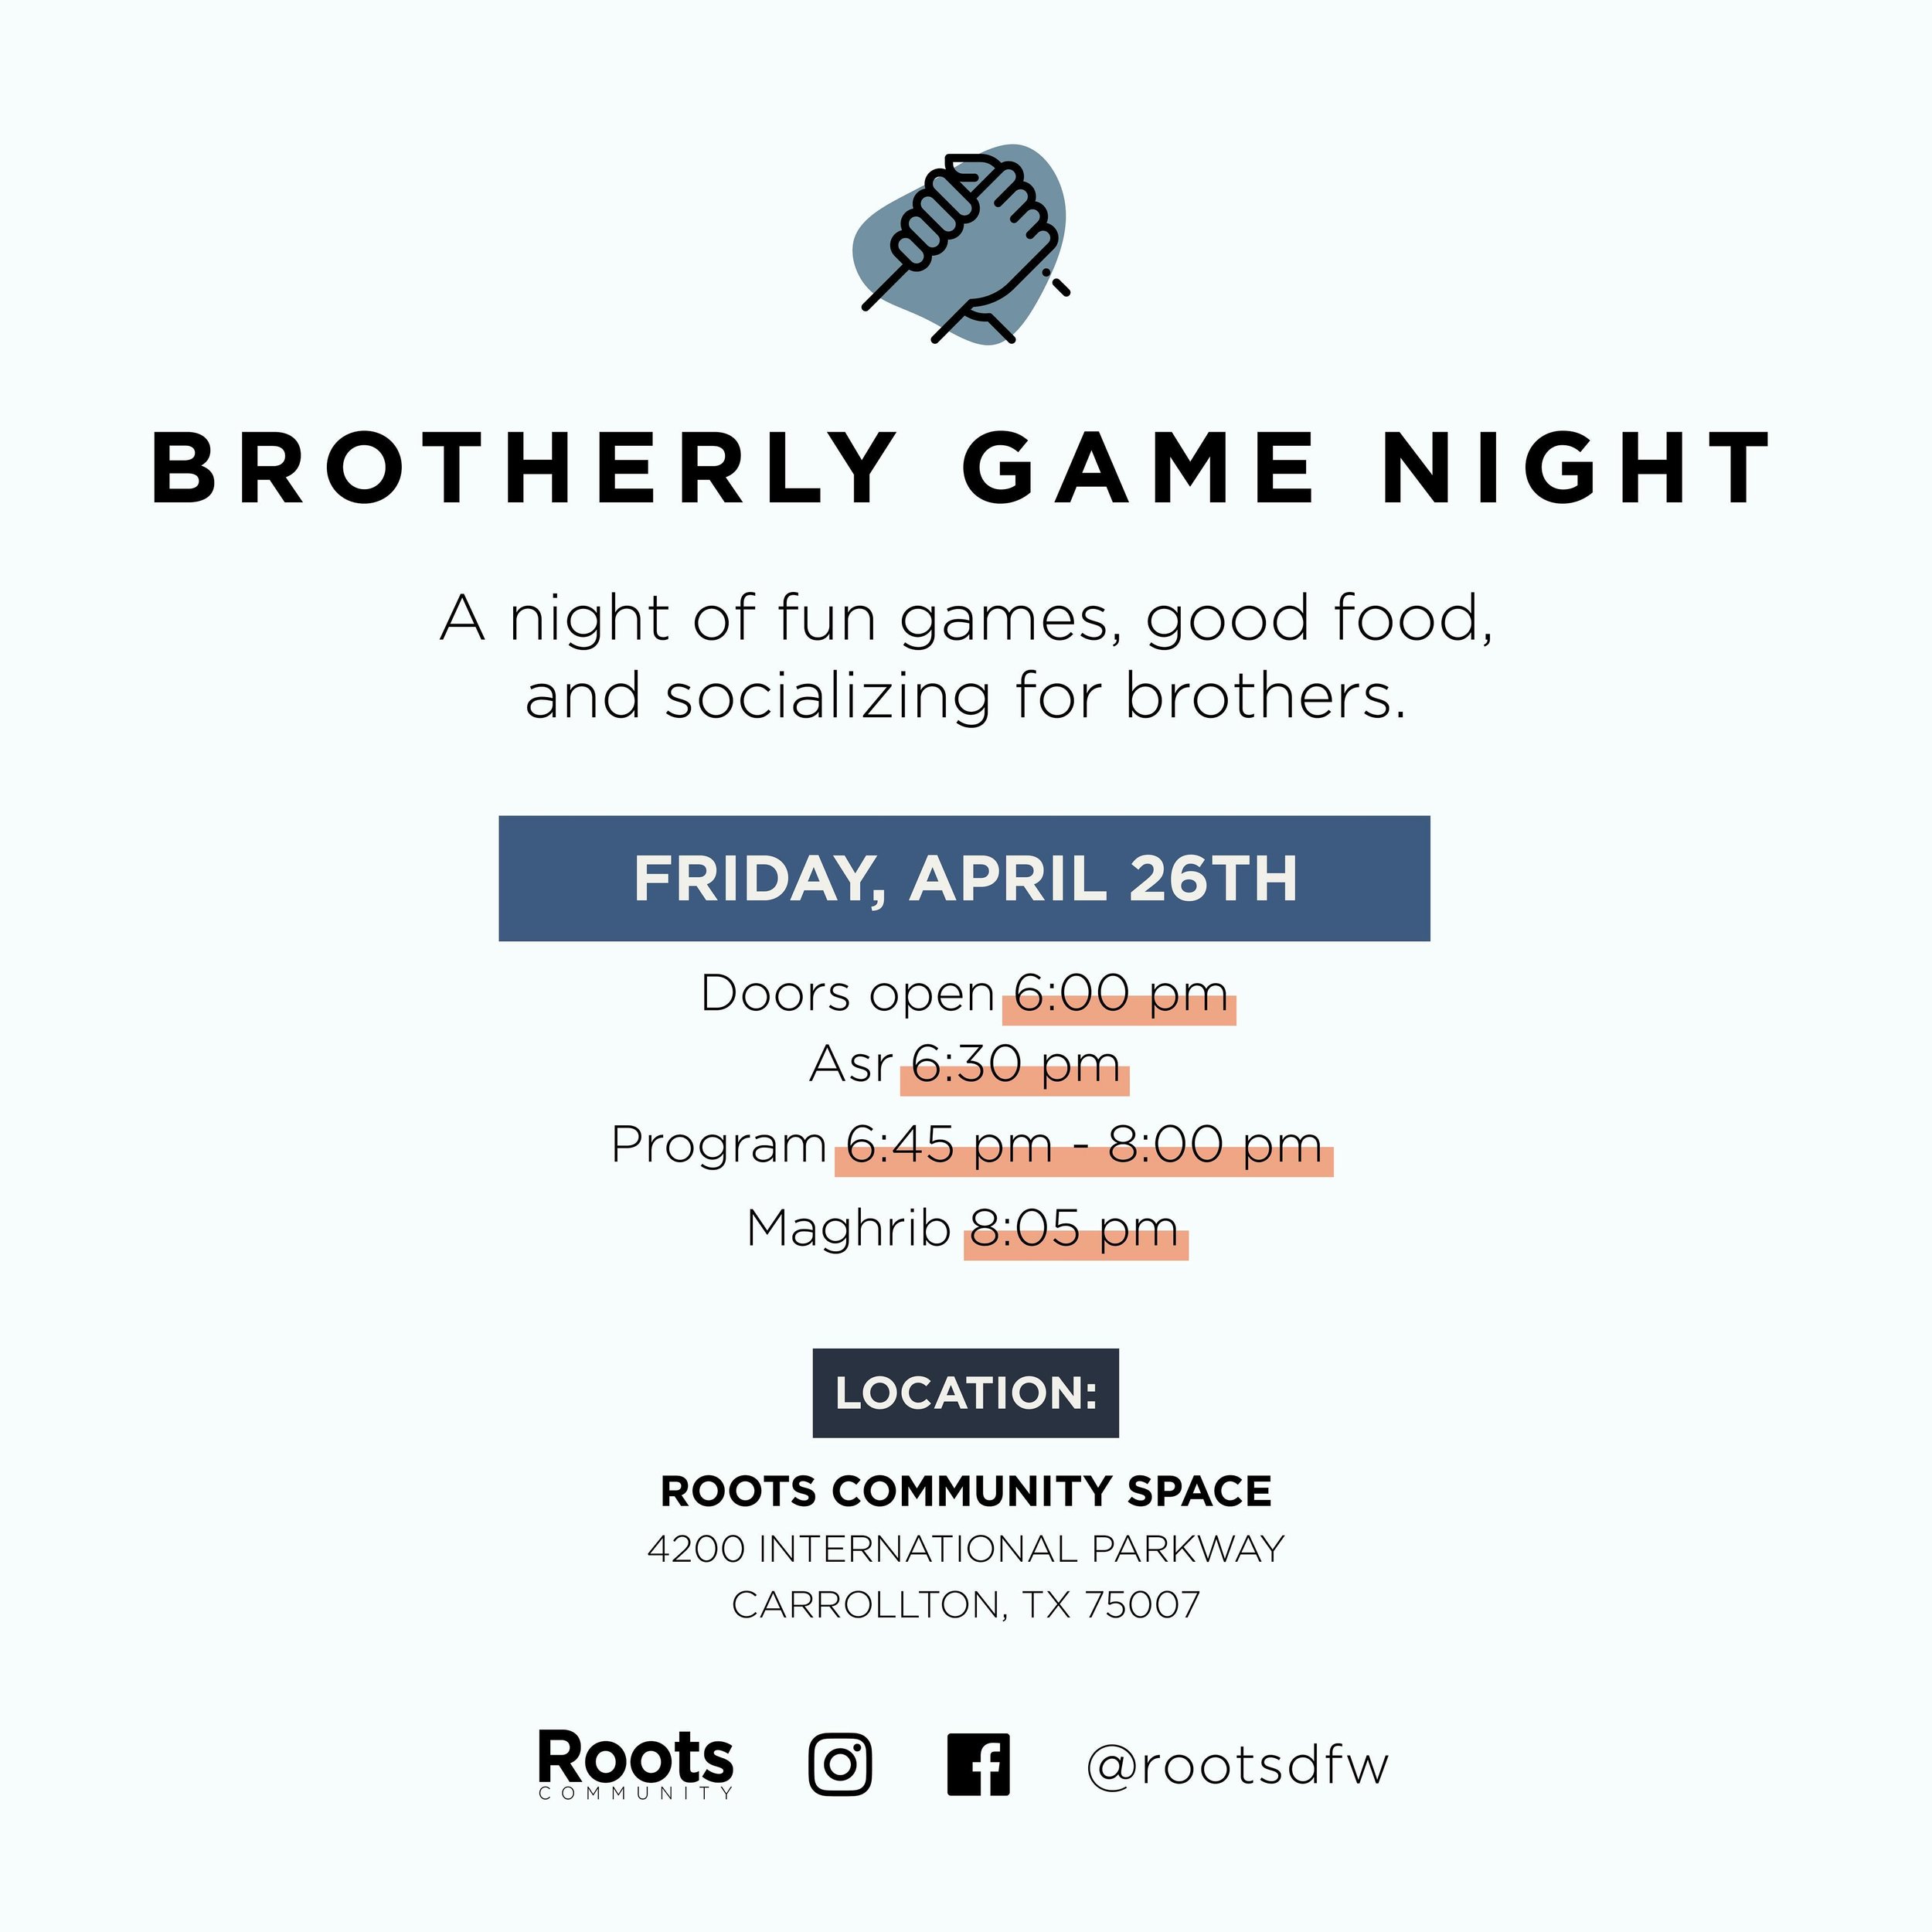 Adult brothers community, end your week with us with a great hang out over food, games, and good company. We will be ending the program with Maghrib prayer and Du&rsquo;a inshaAllah.